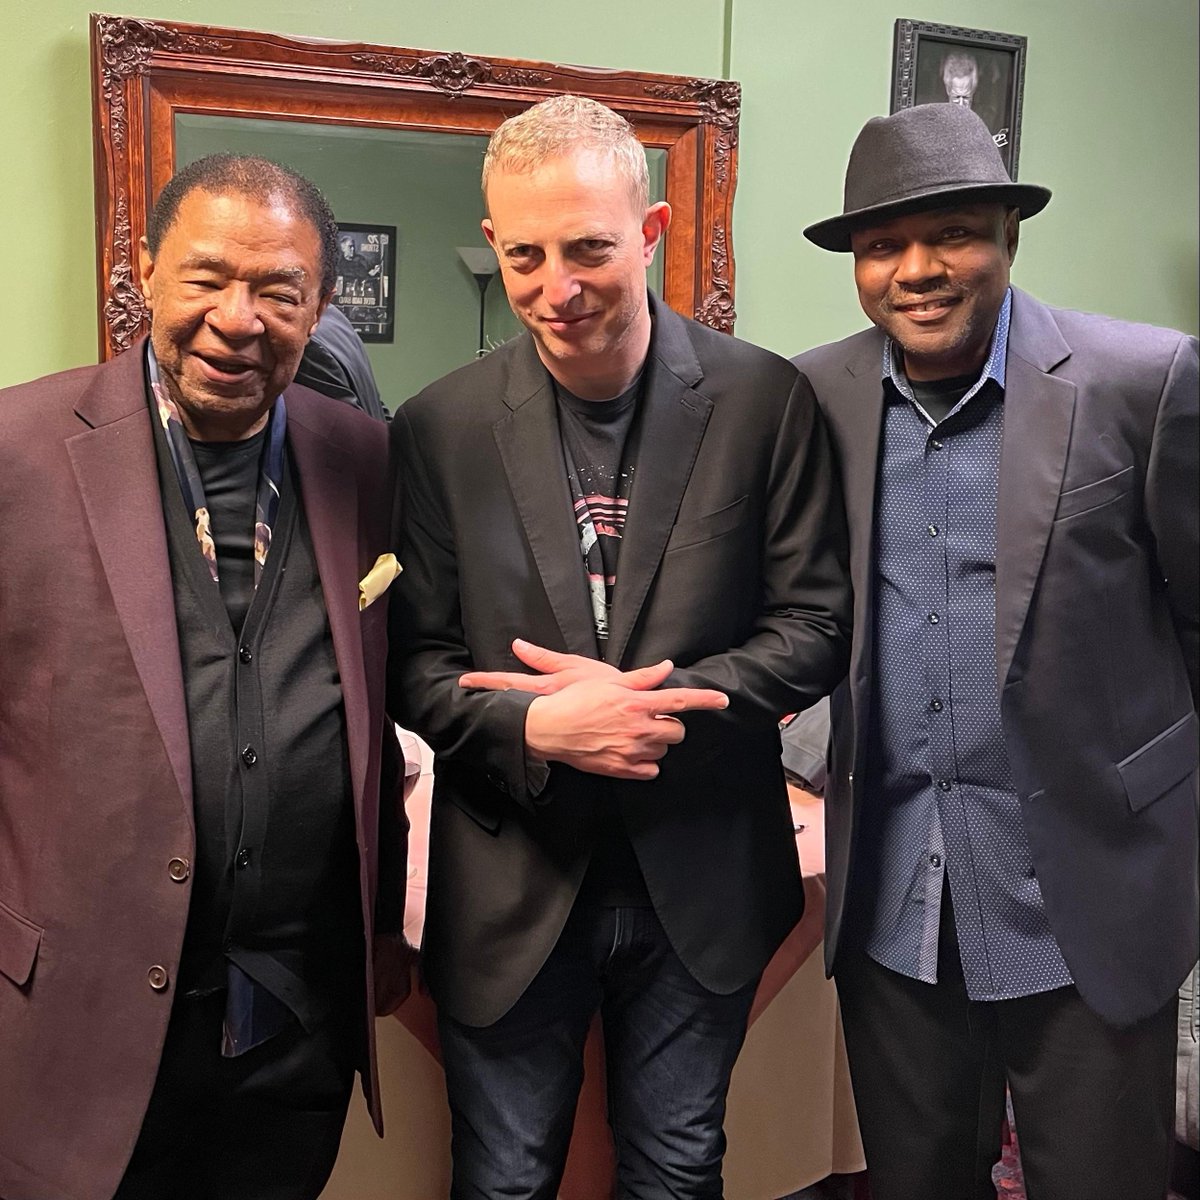 Two shows @jacklondonrevue on May 24th, 7:30PM & 10PM. Lenny White, Buster Williams, and Noah Haidu take the stage - yes, the legends who've jammed with the likes of Miles Davis and Herbie Hancock. Grab your tickets fast! 🎟️ pdxjazz.org⁠ #pdxjazz #portland #pdx